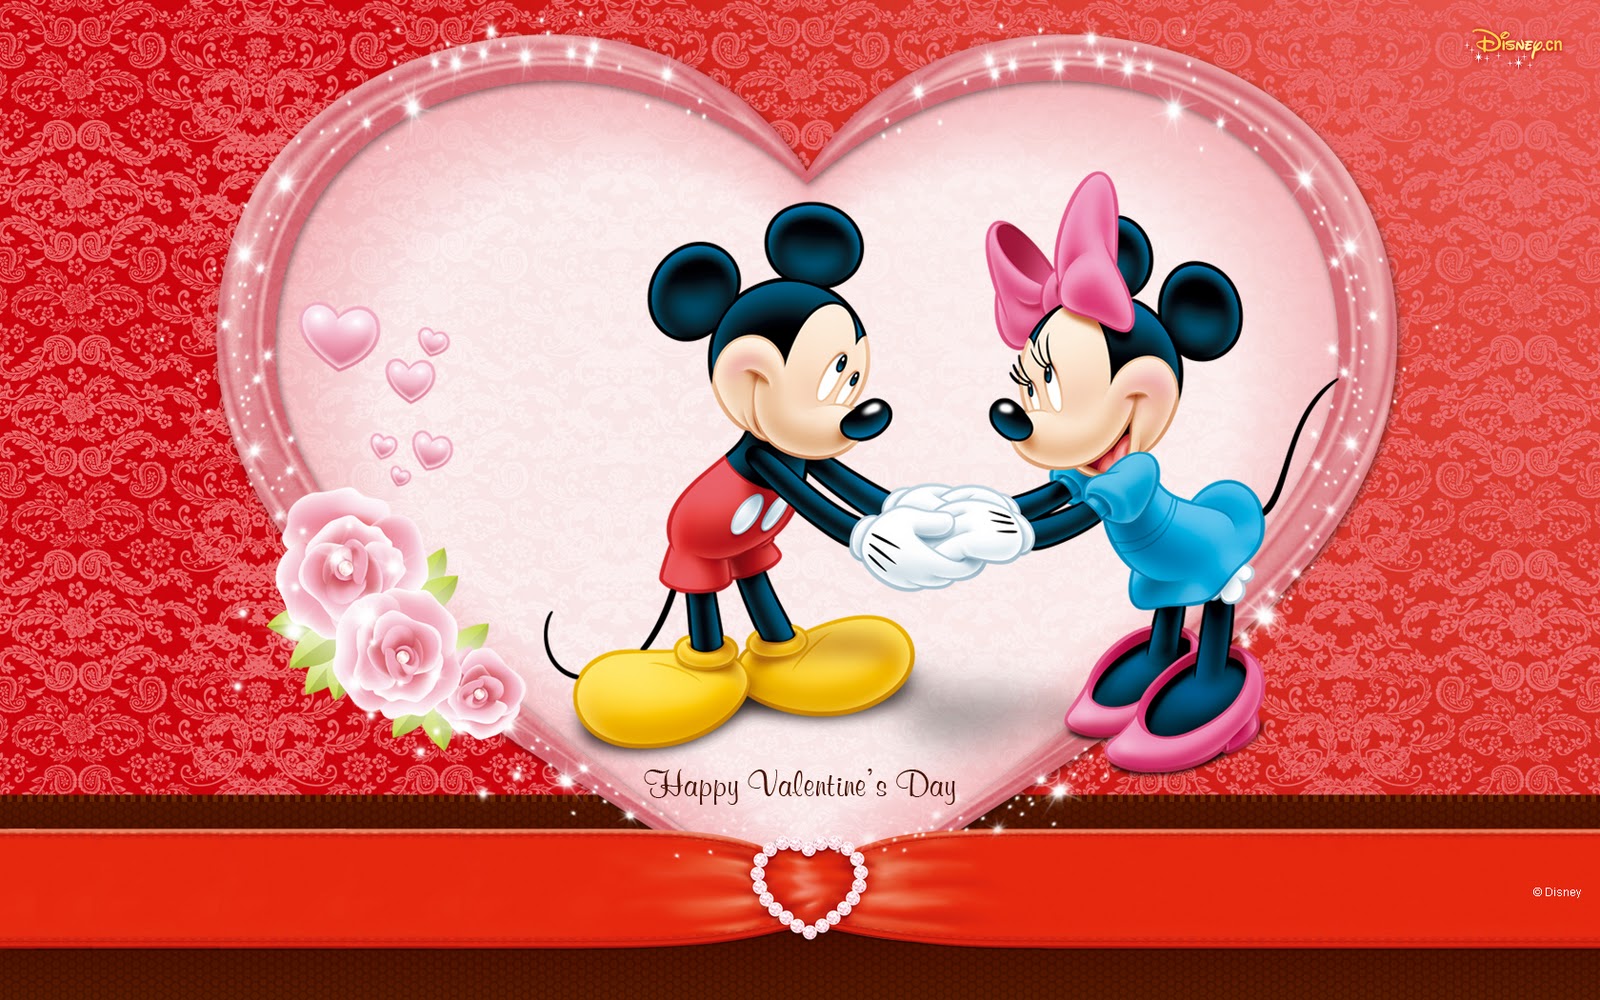 Top 10 Valentines Day Desktop Wallpapers for Free 2015 Valentine